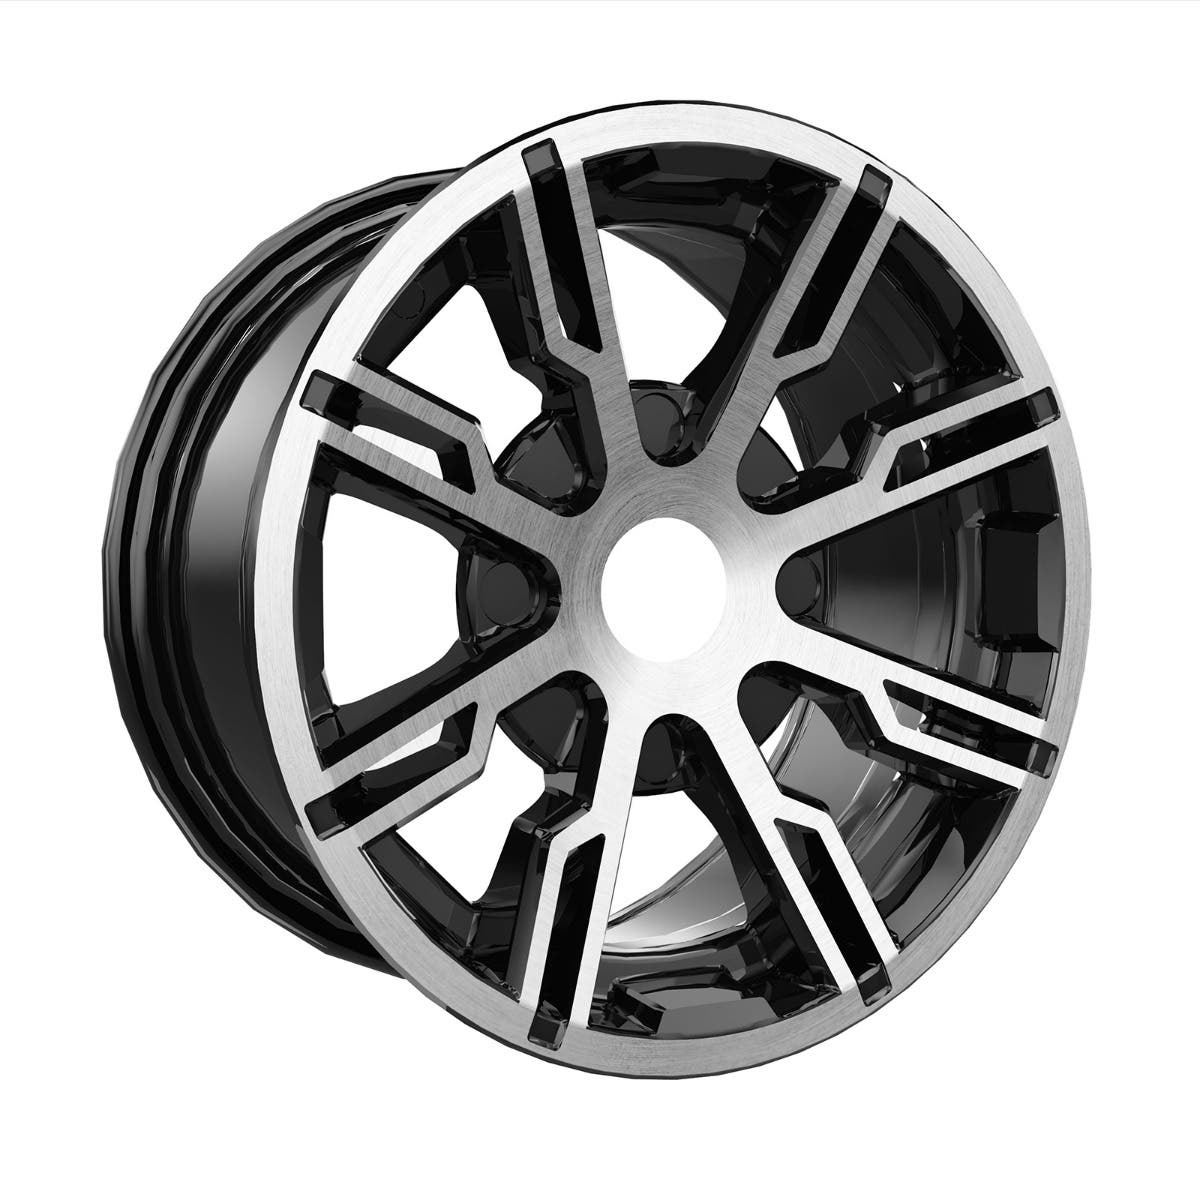 Limited 14 in. Rim - Front